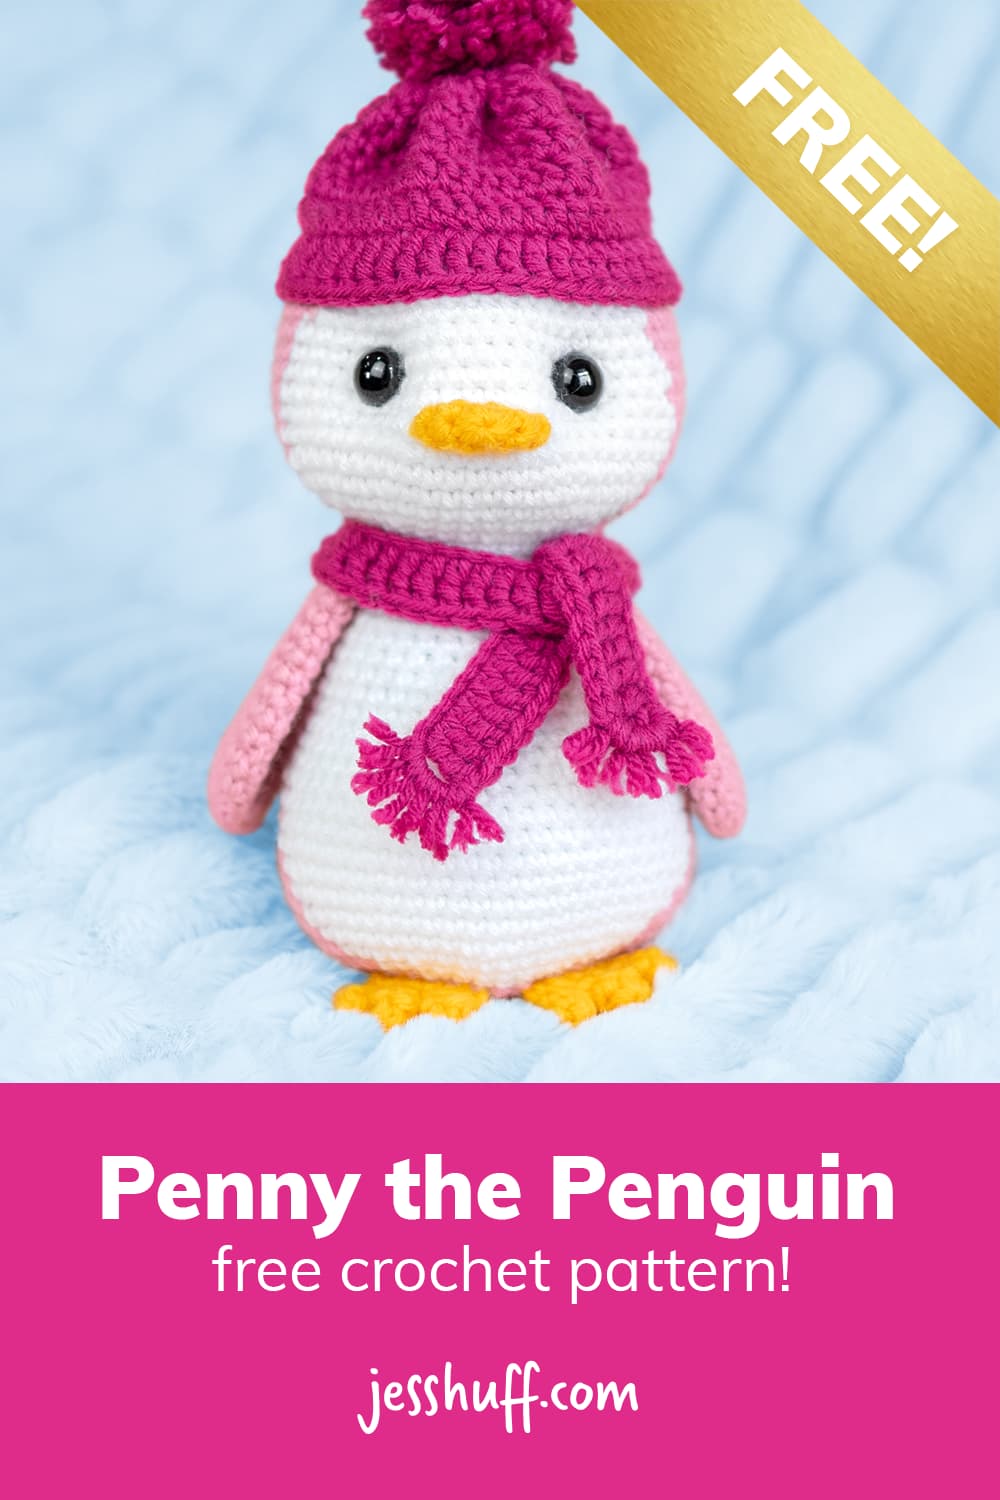 This no-sew penguin amigurumi pattern is available for free! It stands 14" tall when crocheted with worsted weight yarn and a 3.5mm hook. via @heyjesshuff